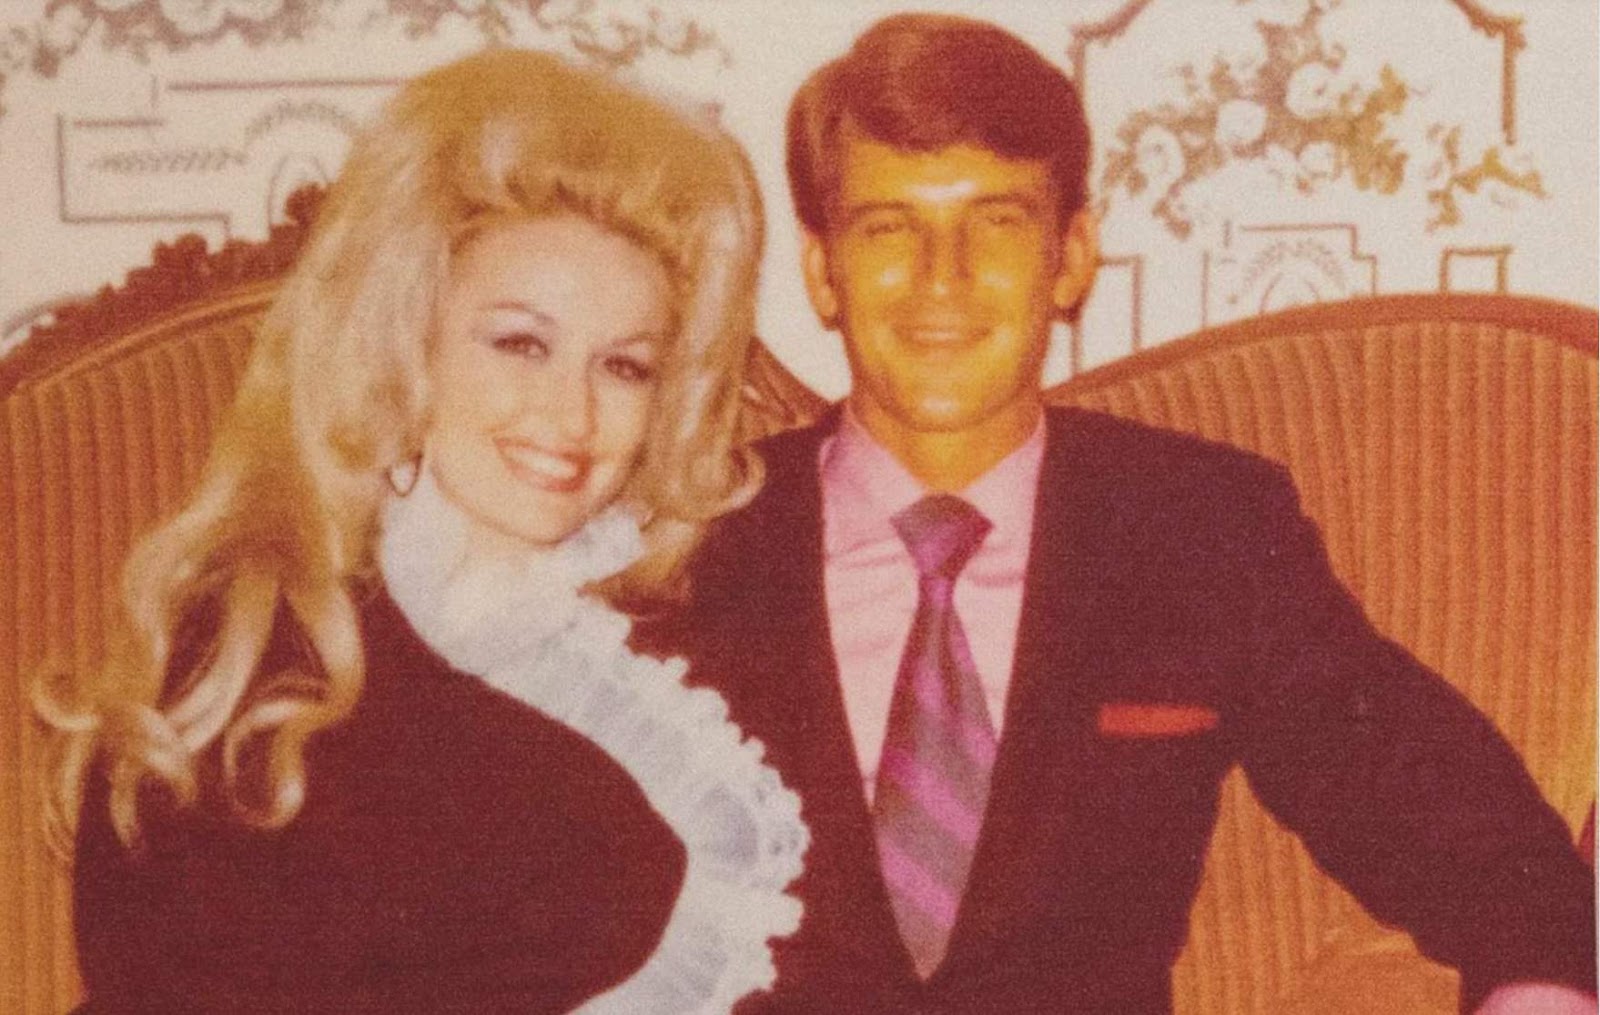 Dolly Parton, country music superhero, with husband Carl